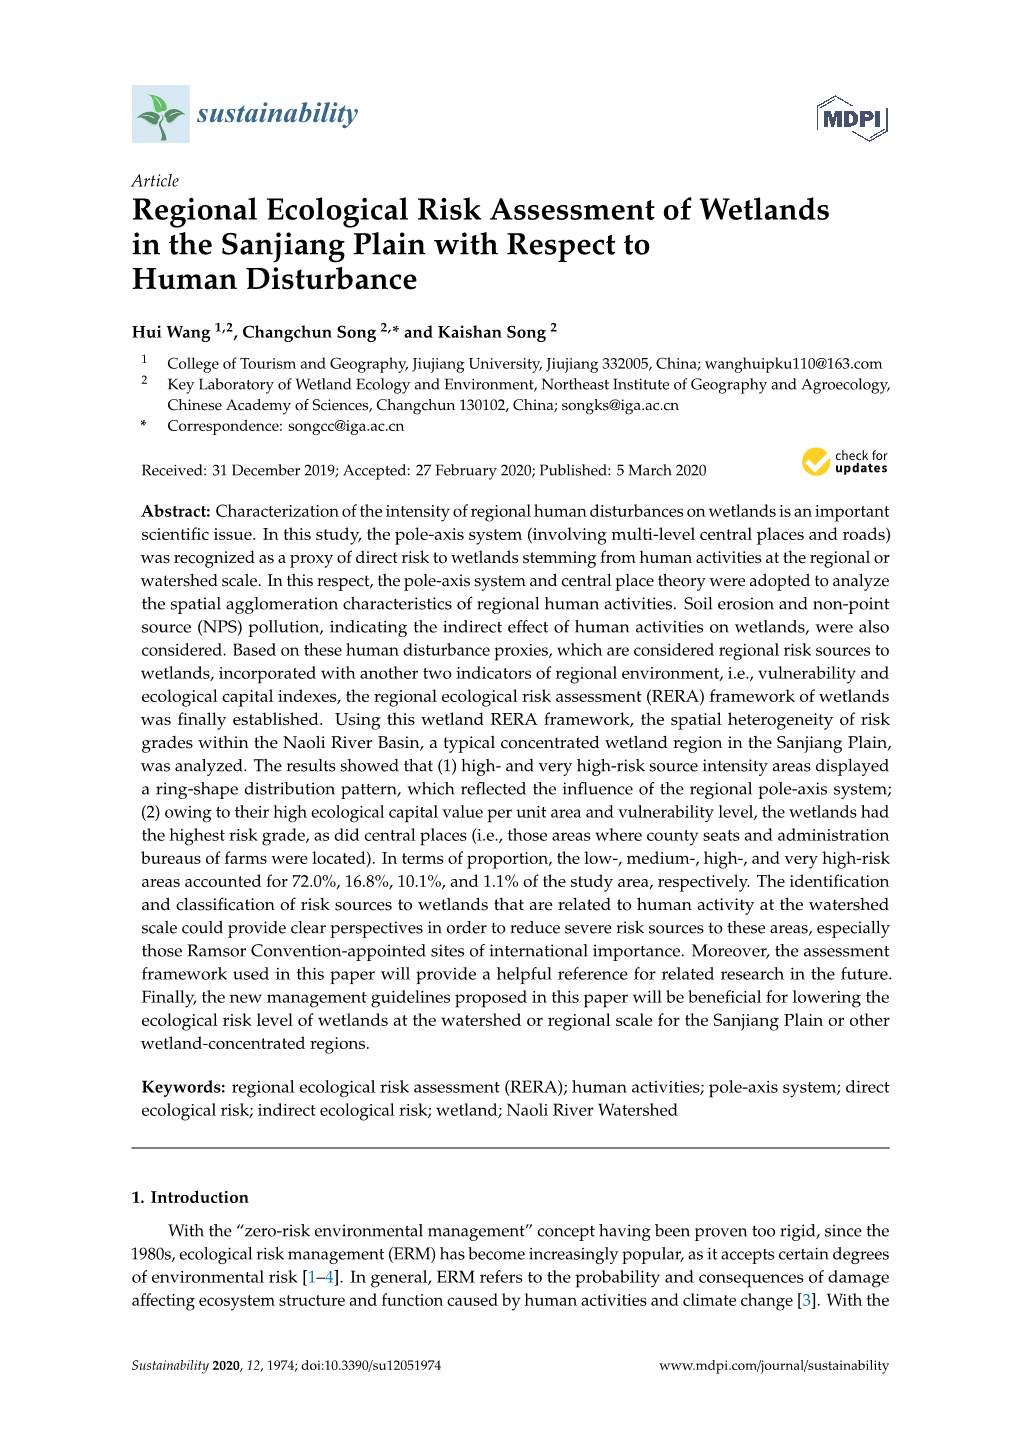 Regional Ecological Risk Assessment of Wetlands in the Sanjiang Plain with Respect to Human Disturbance